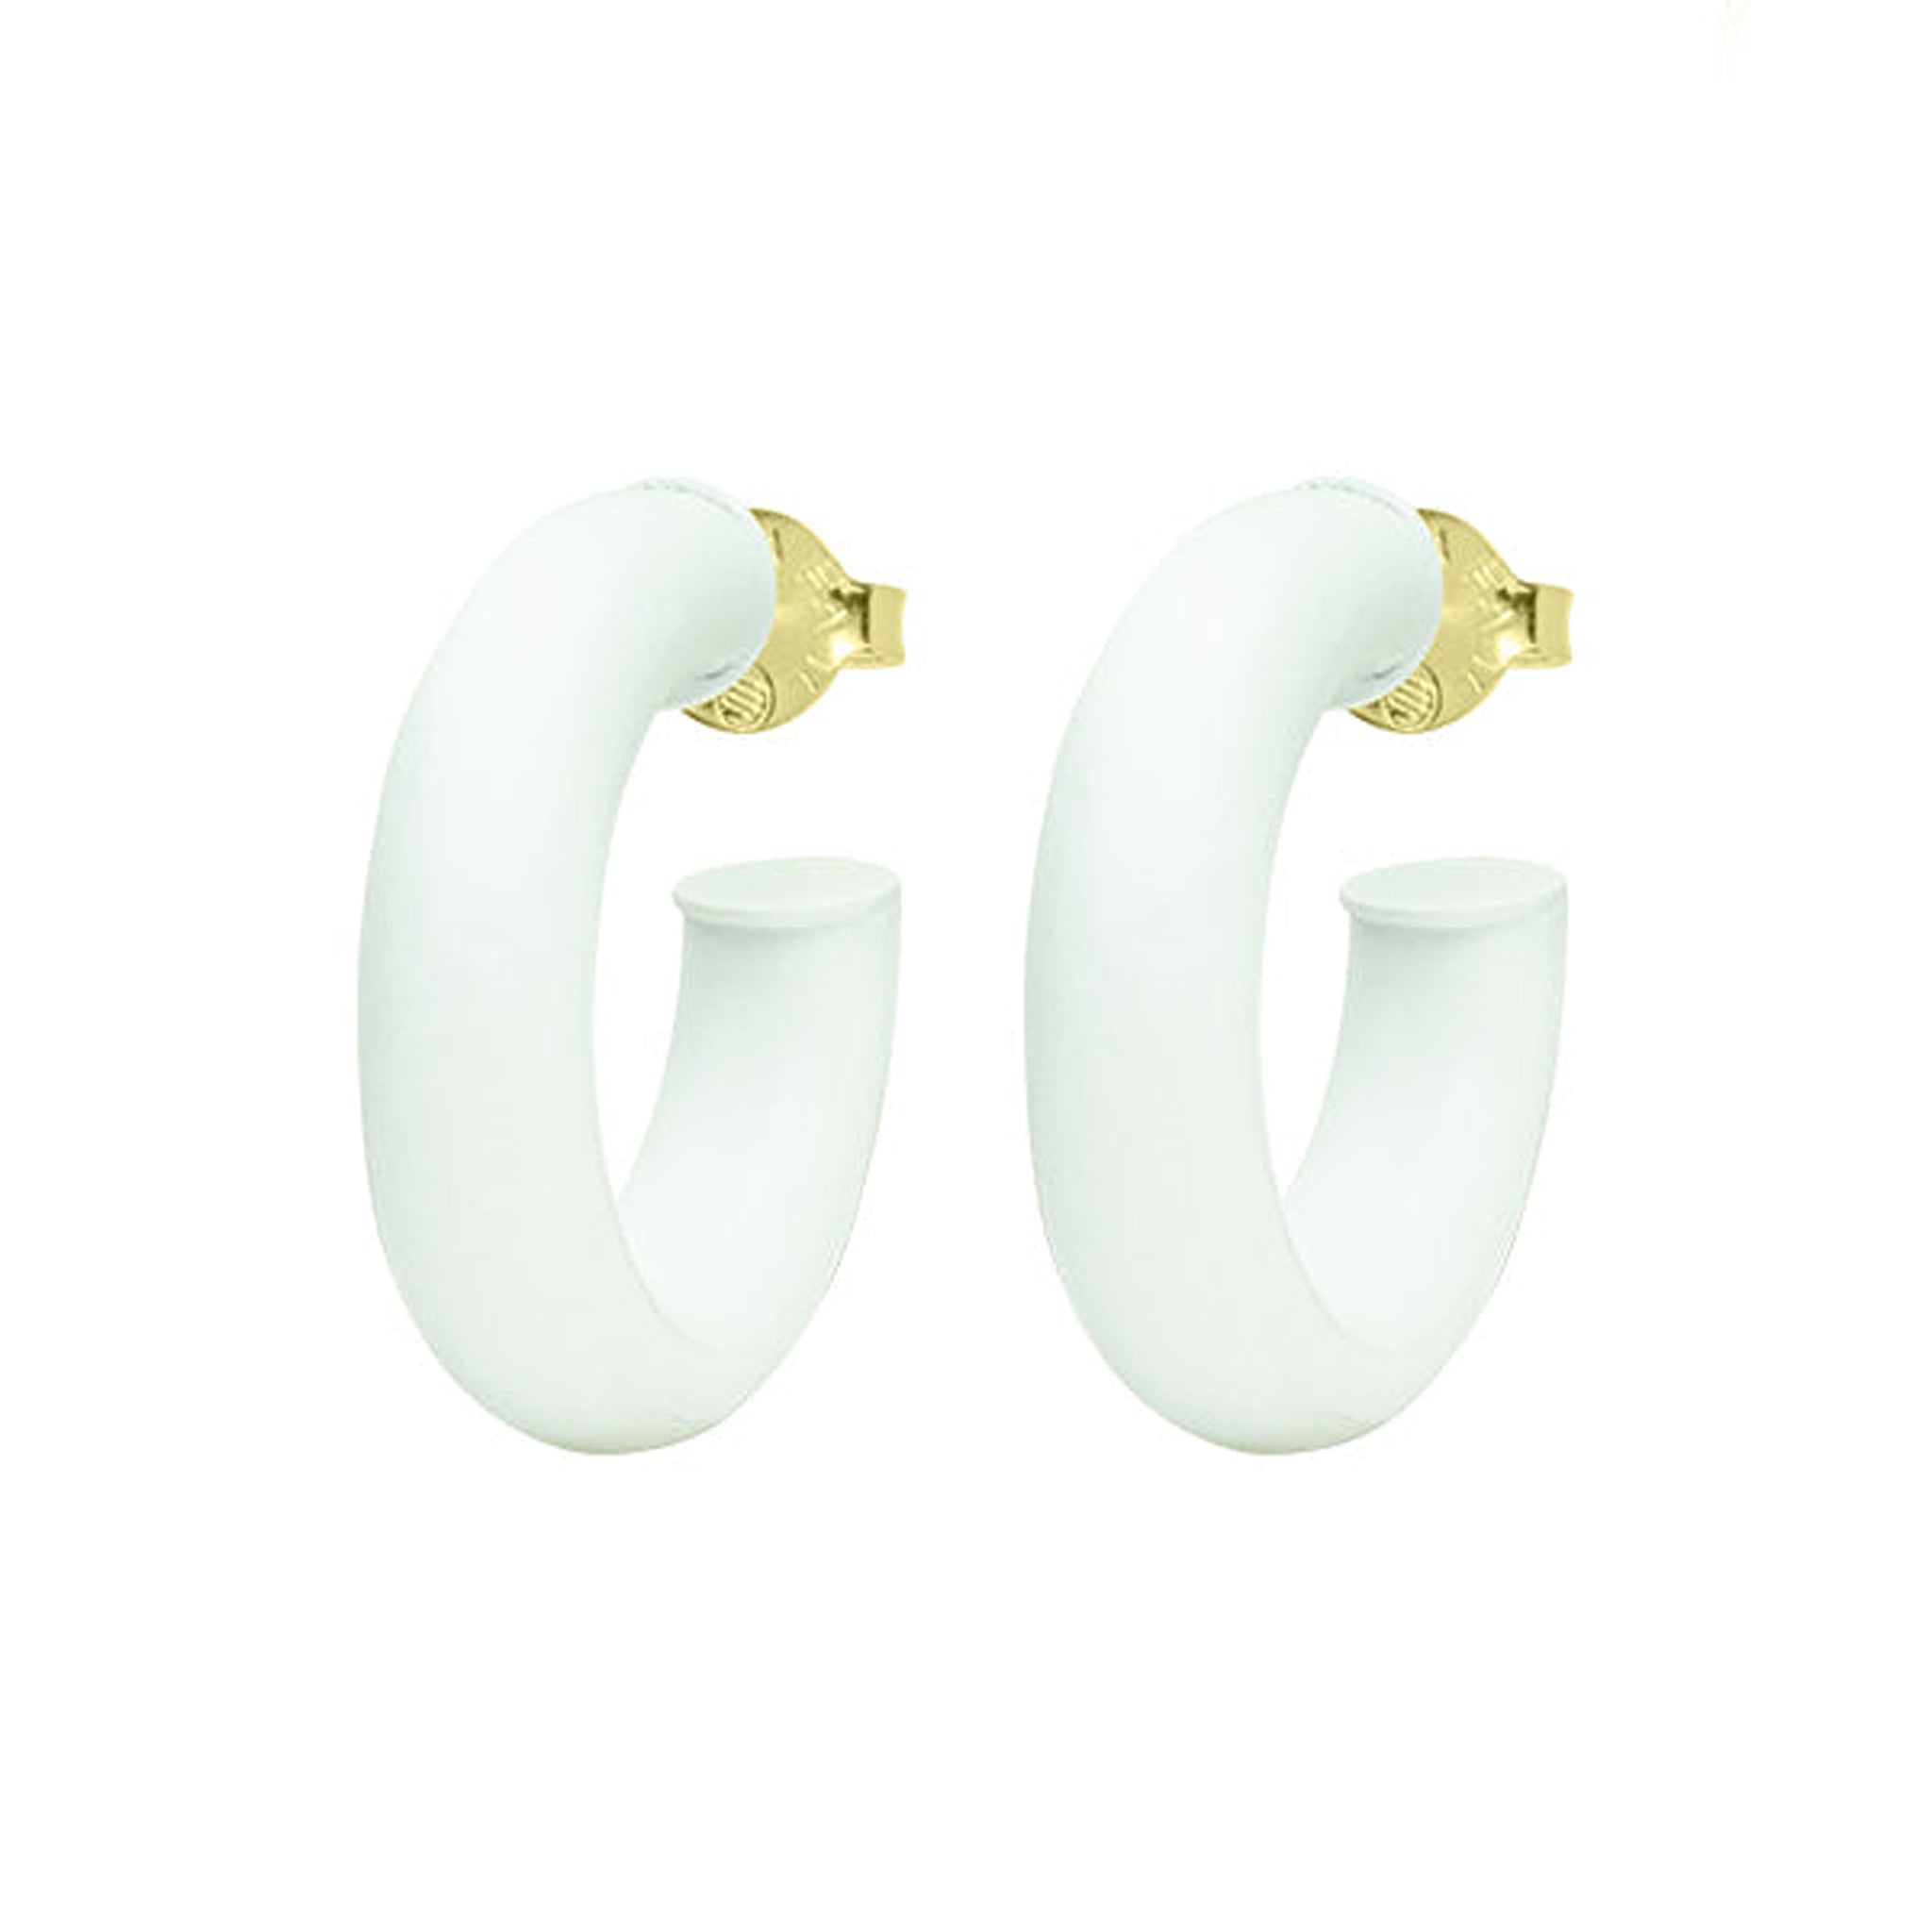 Sheila Fajl Thick Small Chantal Hoop Earrings in Painted White